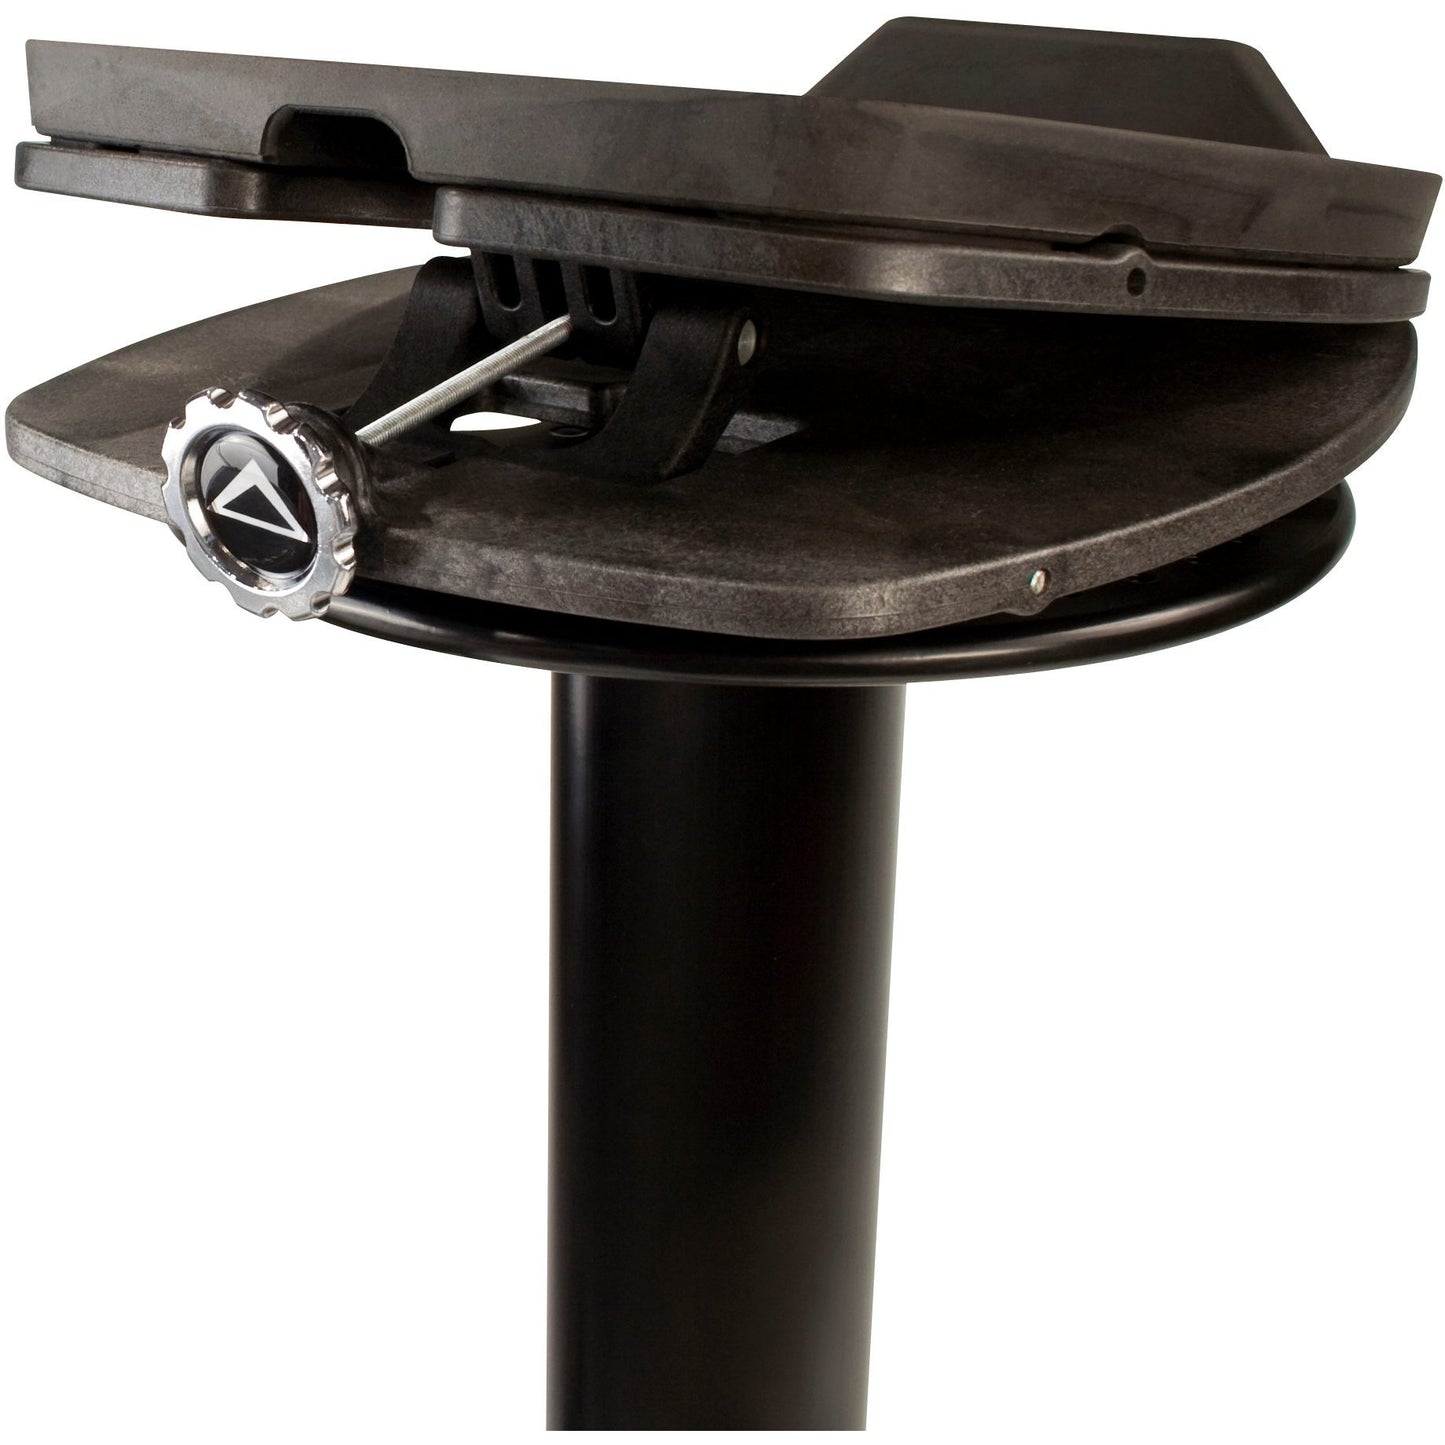 Ultimate Support MS-100B Studio Monitor Stands, Black, Pair